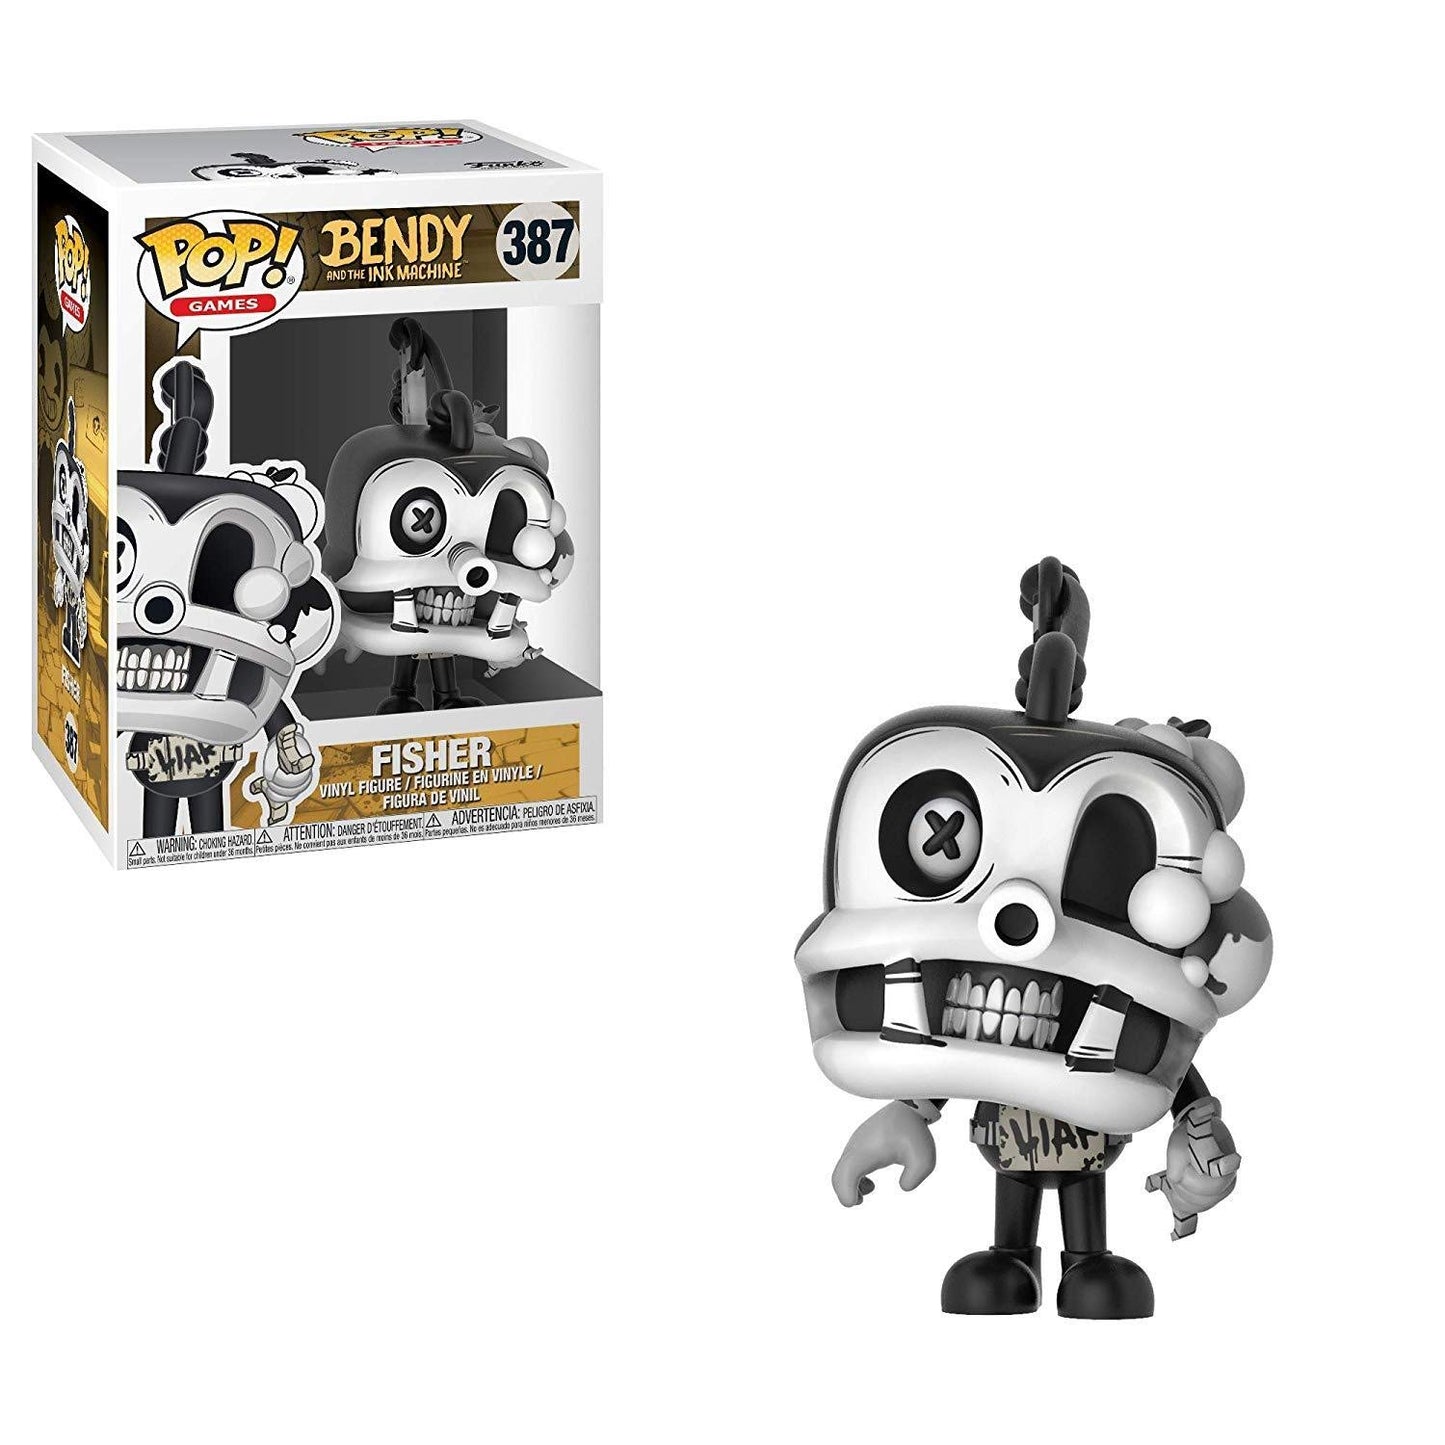 Funko Pop Games: Bendy and The Ink Machine - Fisher